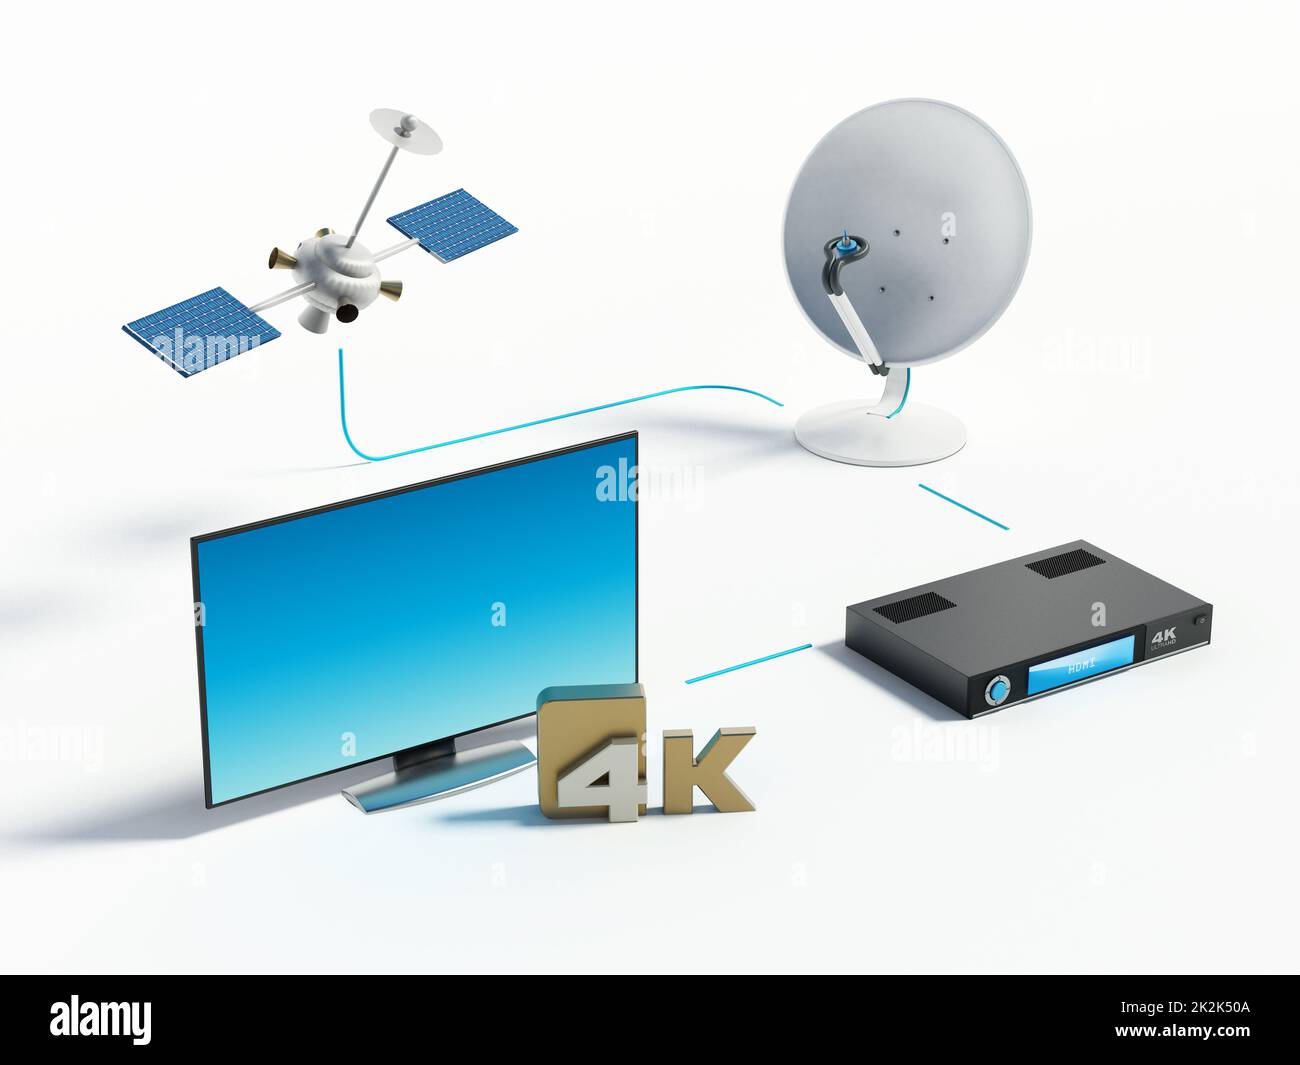 Satellite, dish, 4K ultra HD receiver and TV. 3D illustration Stock Photo